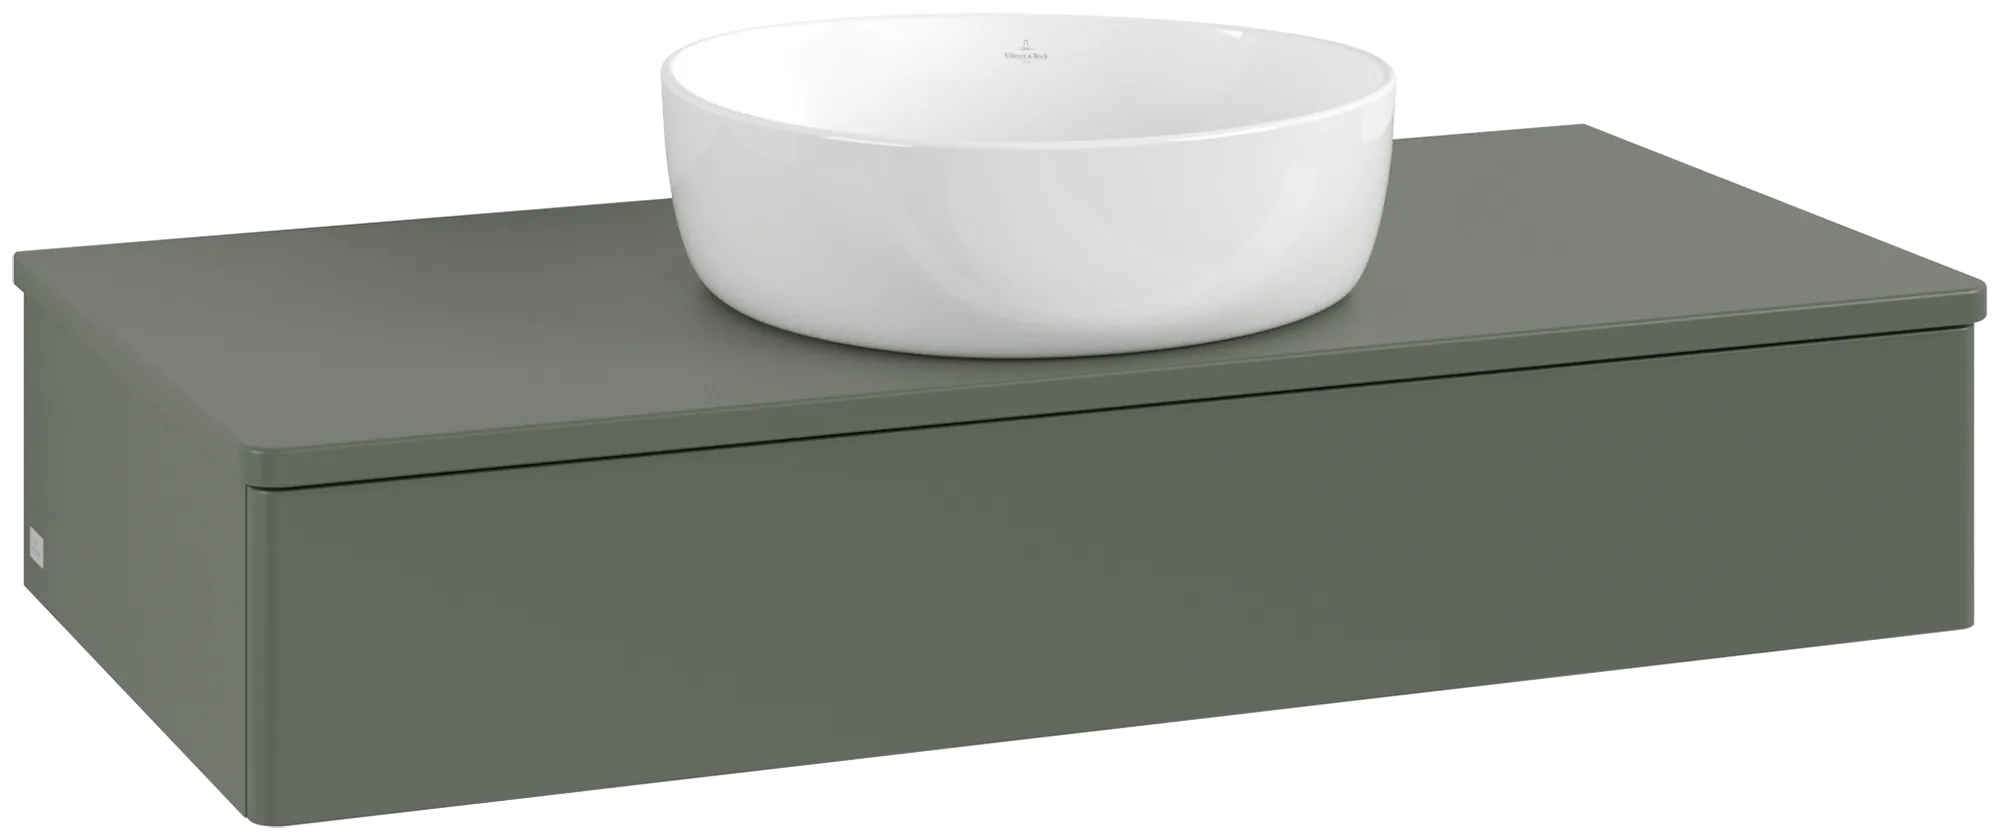 Picture of VILLEROY BOCH Antao Vanity unit, 1 pull-out compartment, 1000 x 190 x 500 mm, Front without structure, Leaf Green Matt Lacquer / Leaf Green Matt Lacquer #K09050HL